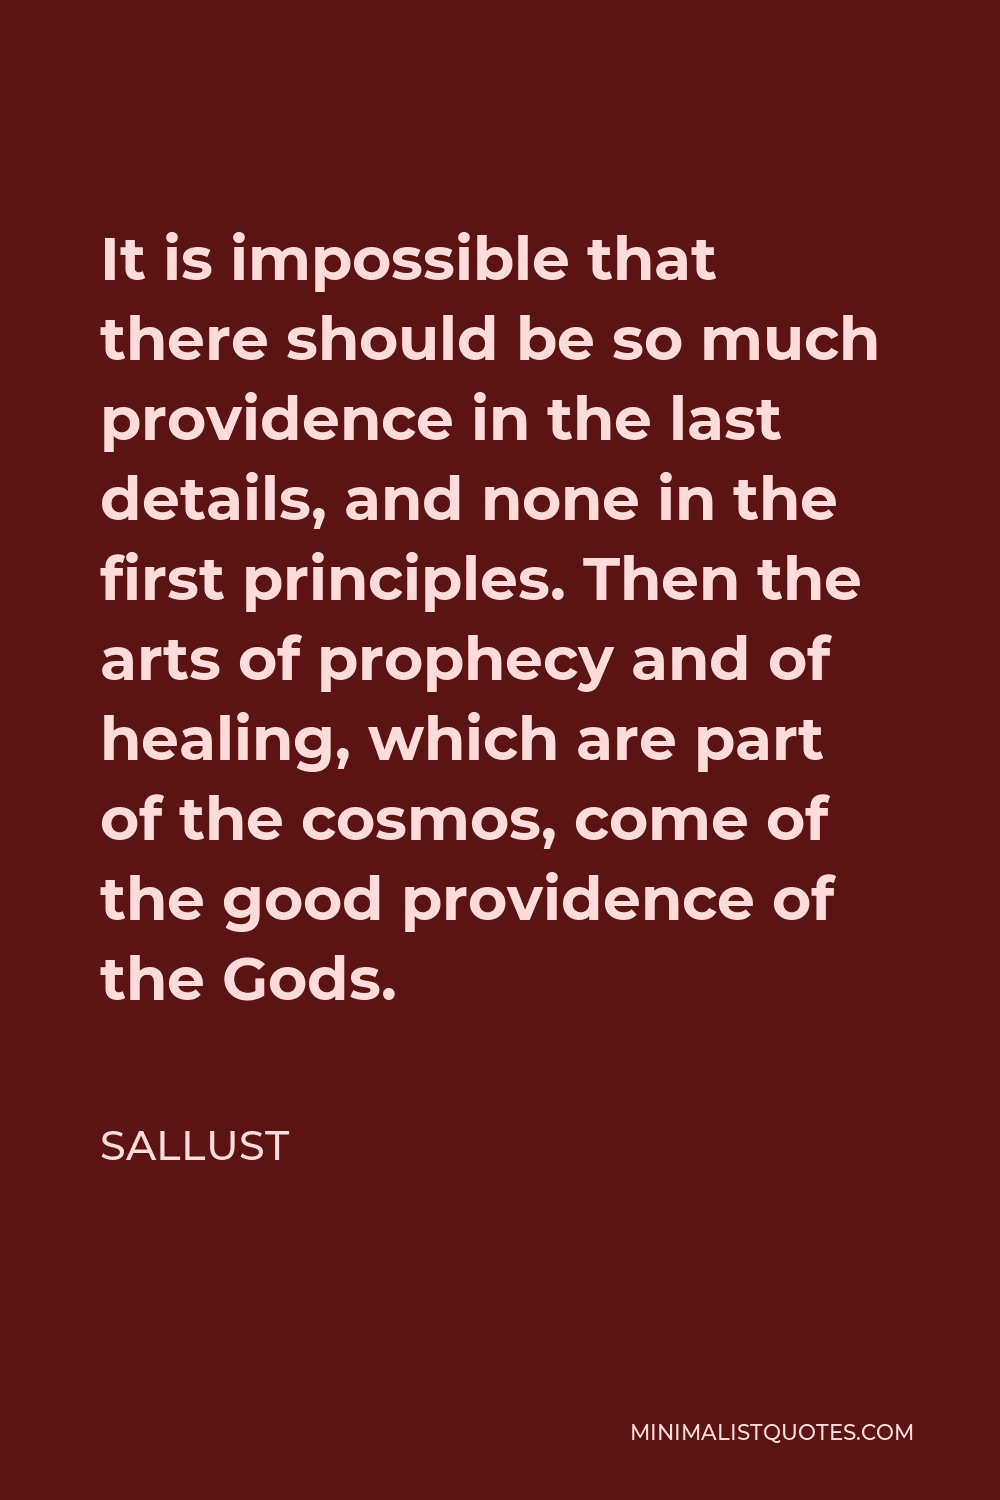 Sallust Quote - It is impossible that there should be so much providence in the last details, and none in the first principles. Then the arts of prophecy and of healing, which are part of the cosmos, come of the good providence of the Gods.